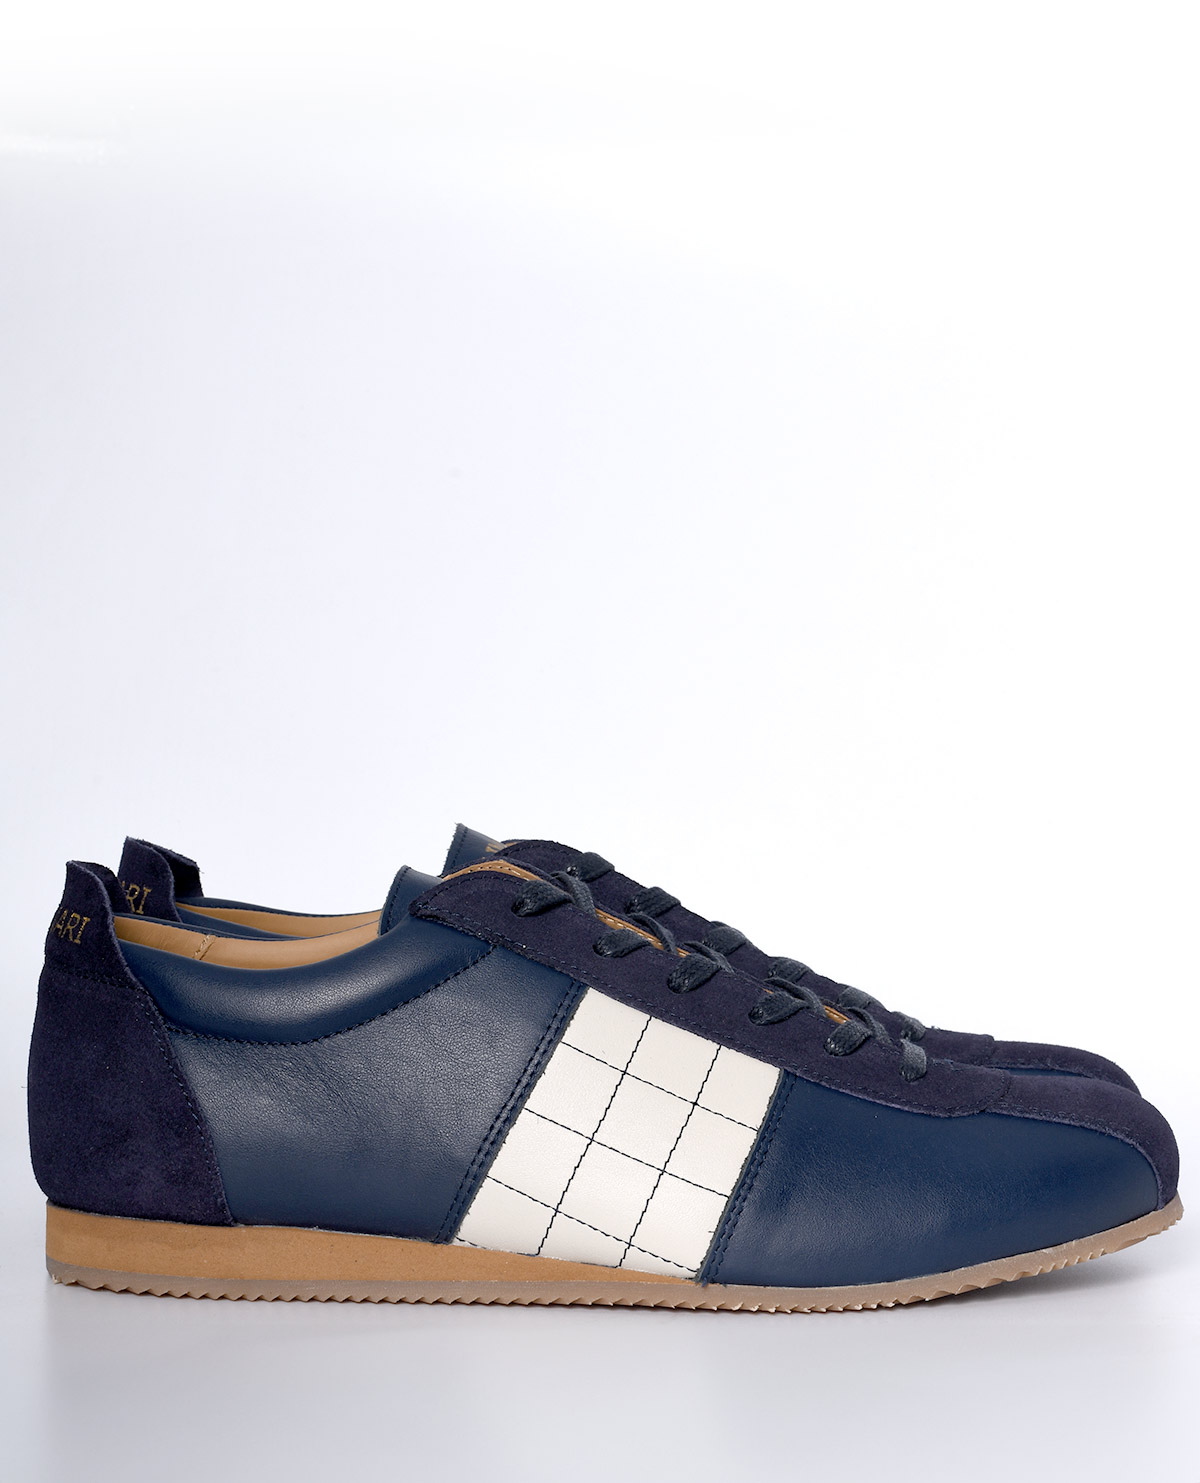 The “Molinari” In Navy & Cream – Old School Trainers – Mod Shoes